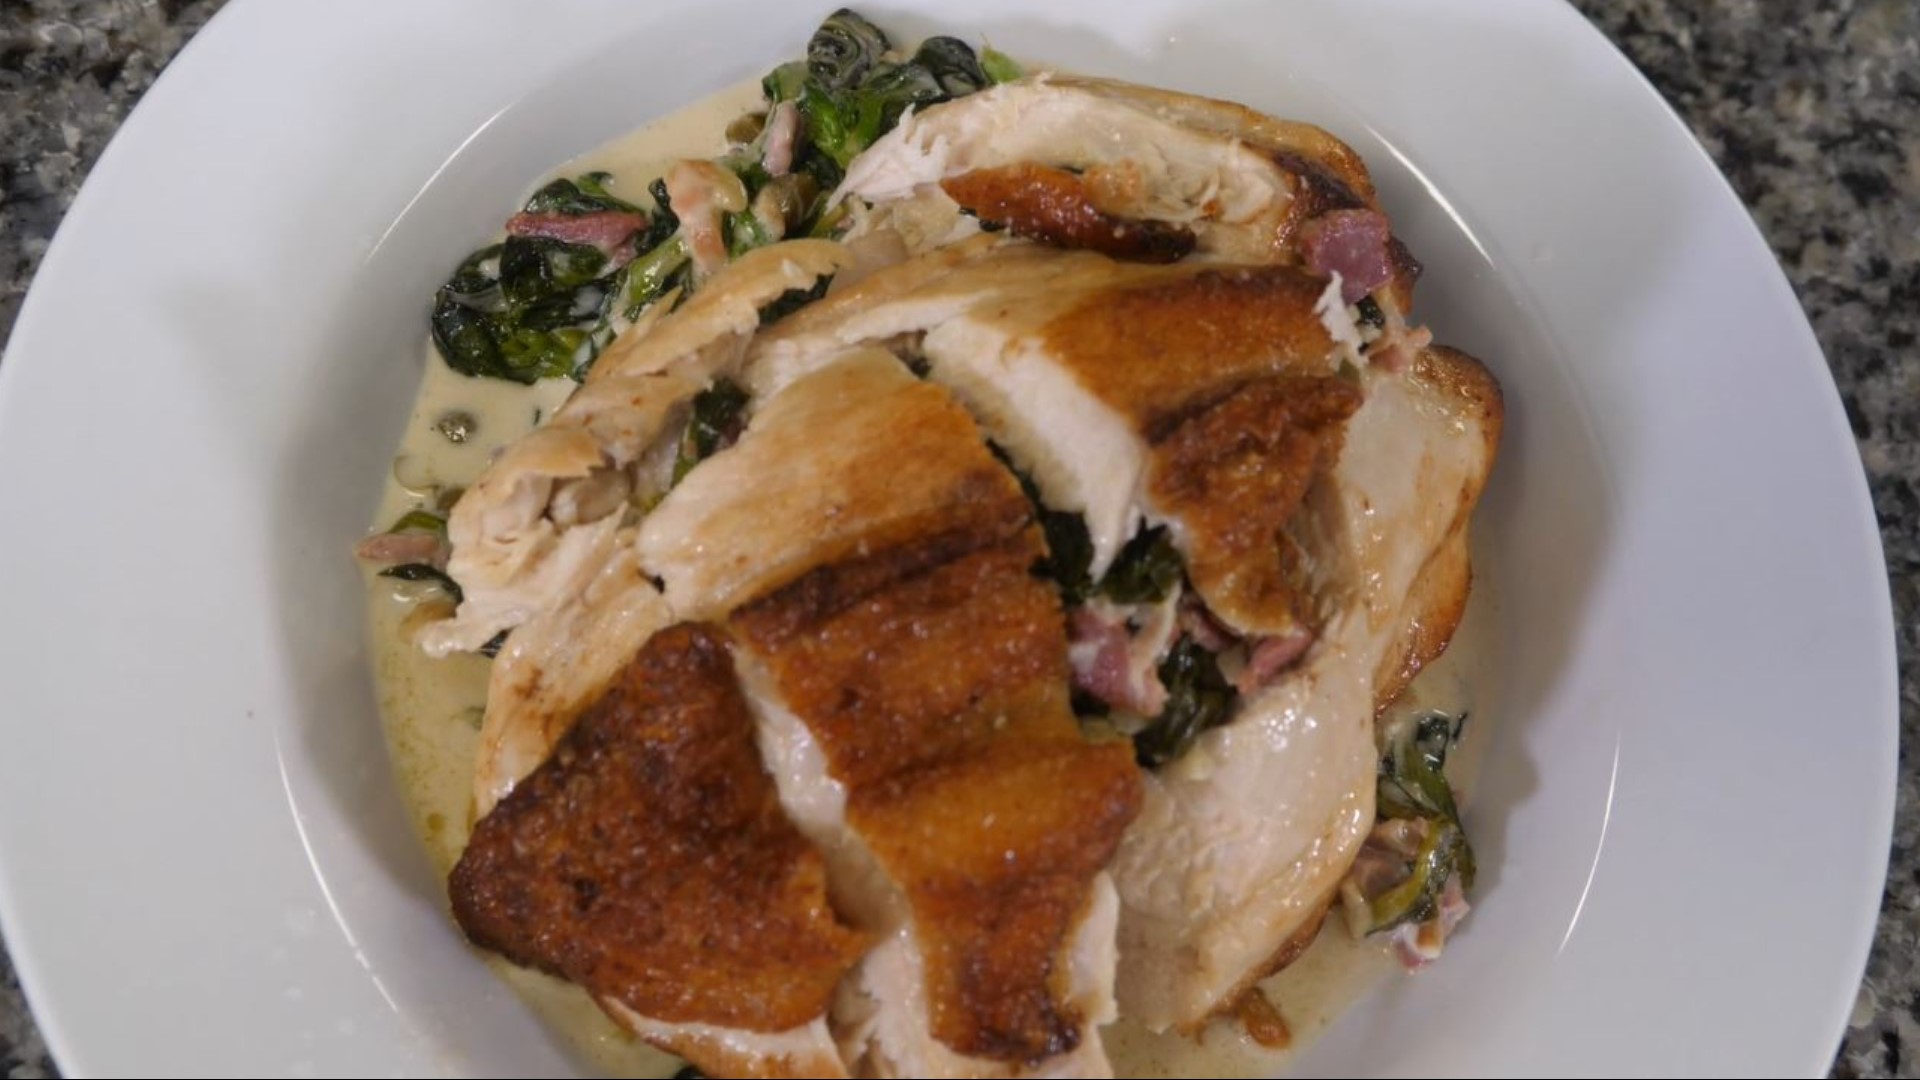 Feb. 19, 2021: How about some comfort food that not only fills your belly, but is healthy for you? Check out this recipe from Cleveland Central Kitchen.